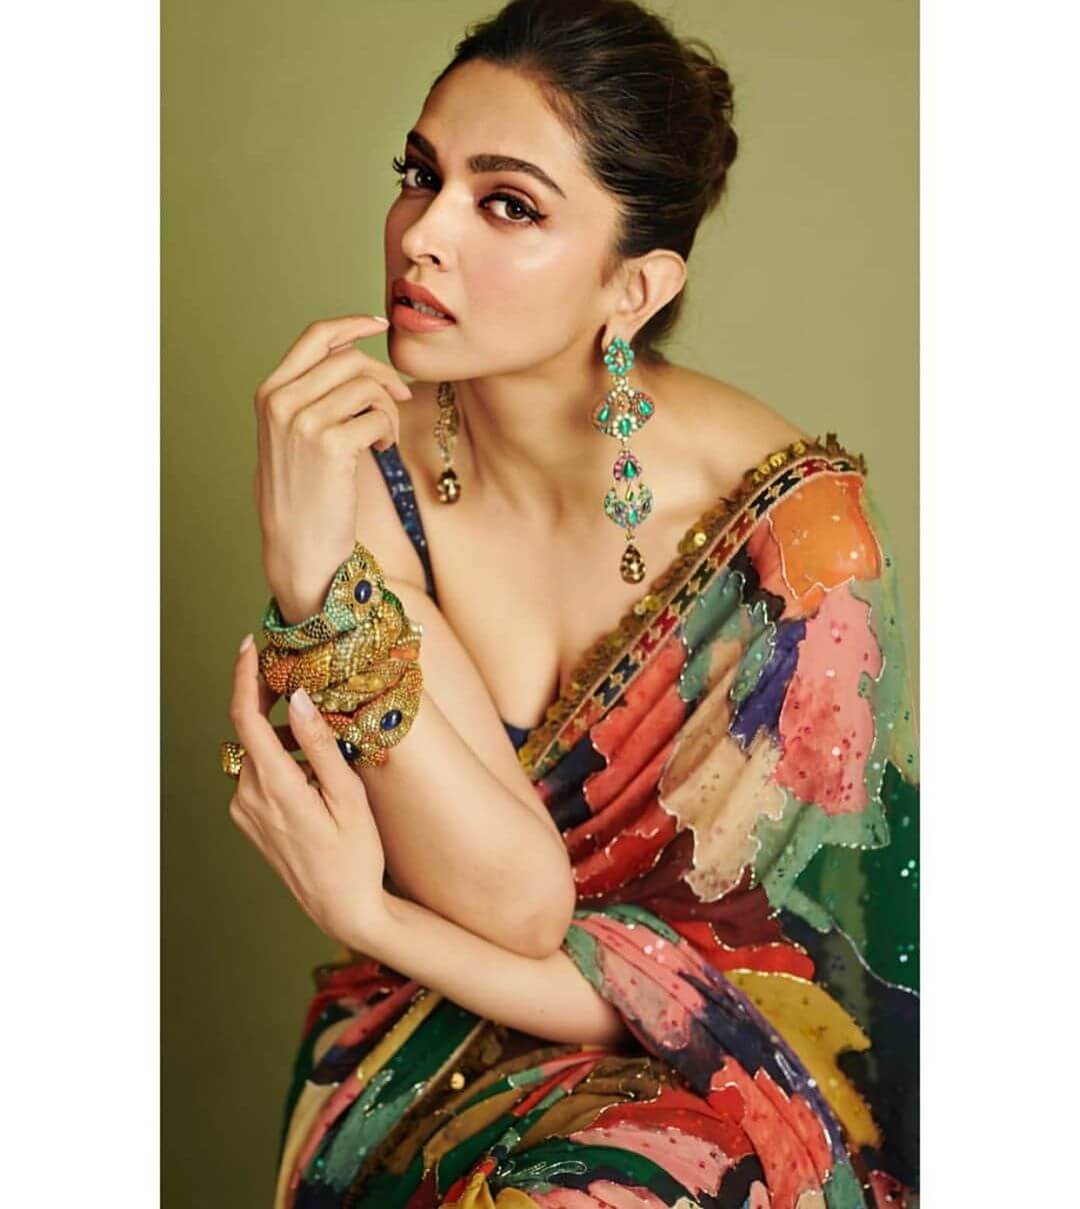 Deepika Padukone’s multicolored bangles on the hand or the emerald studded earrings